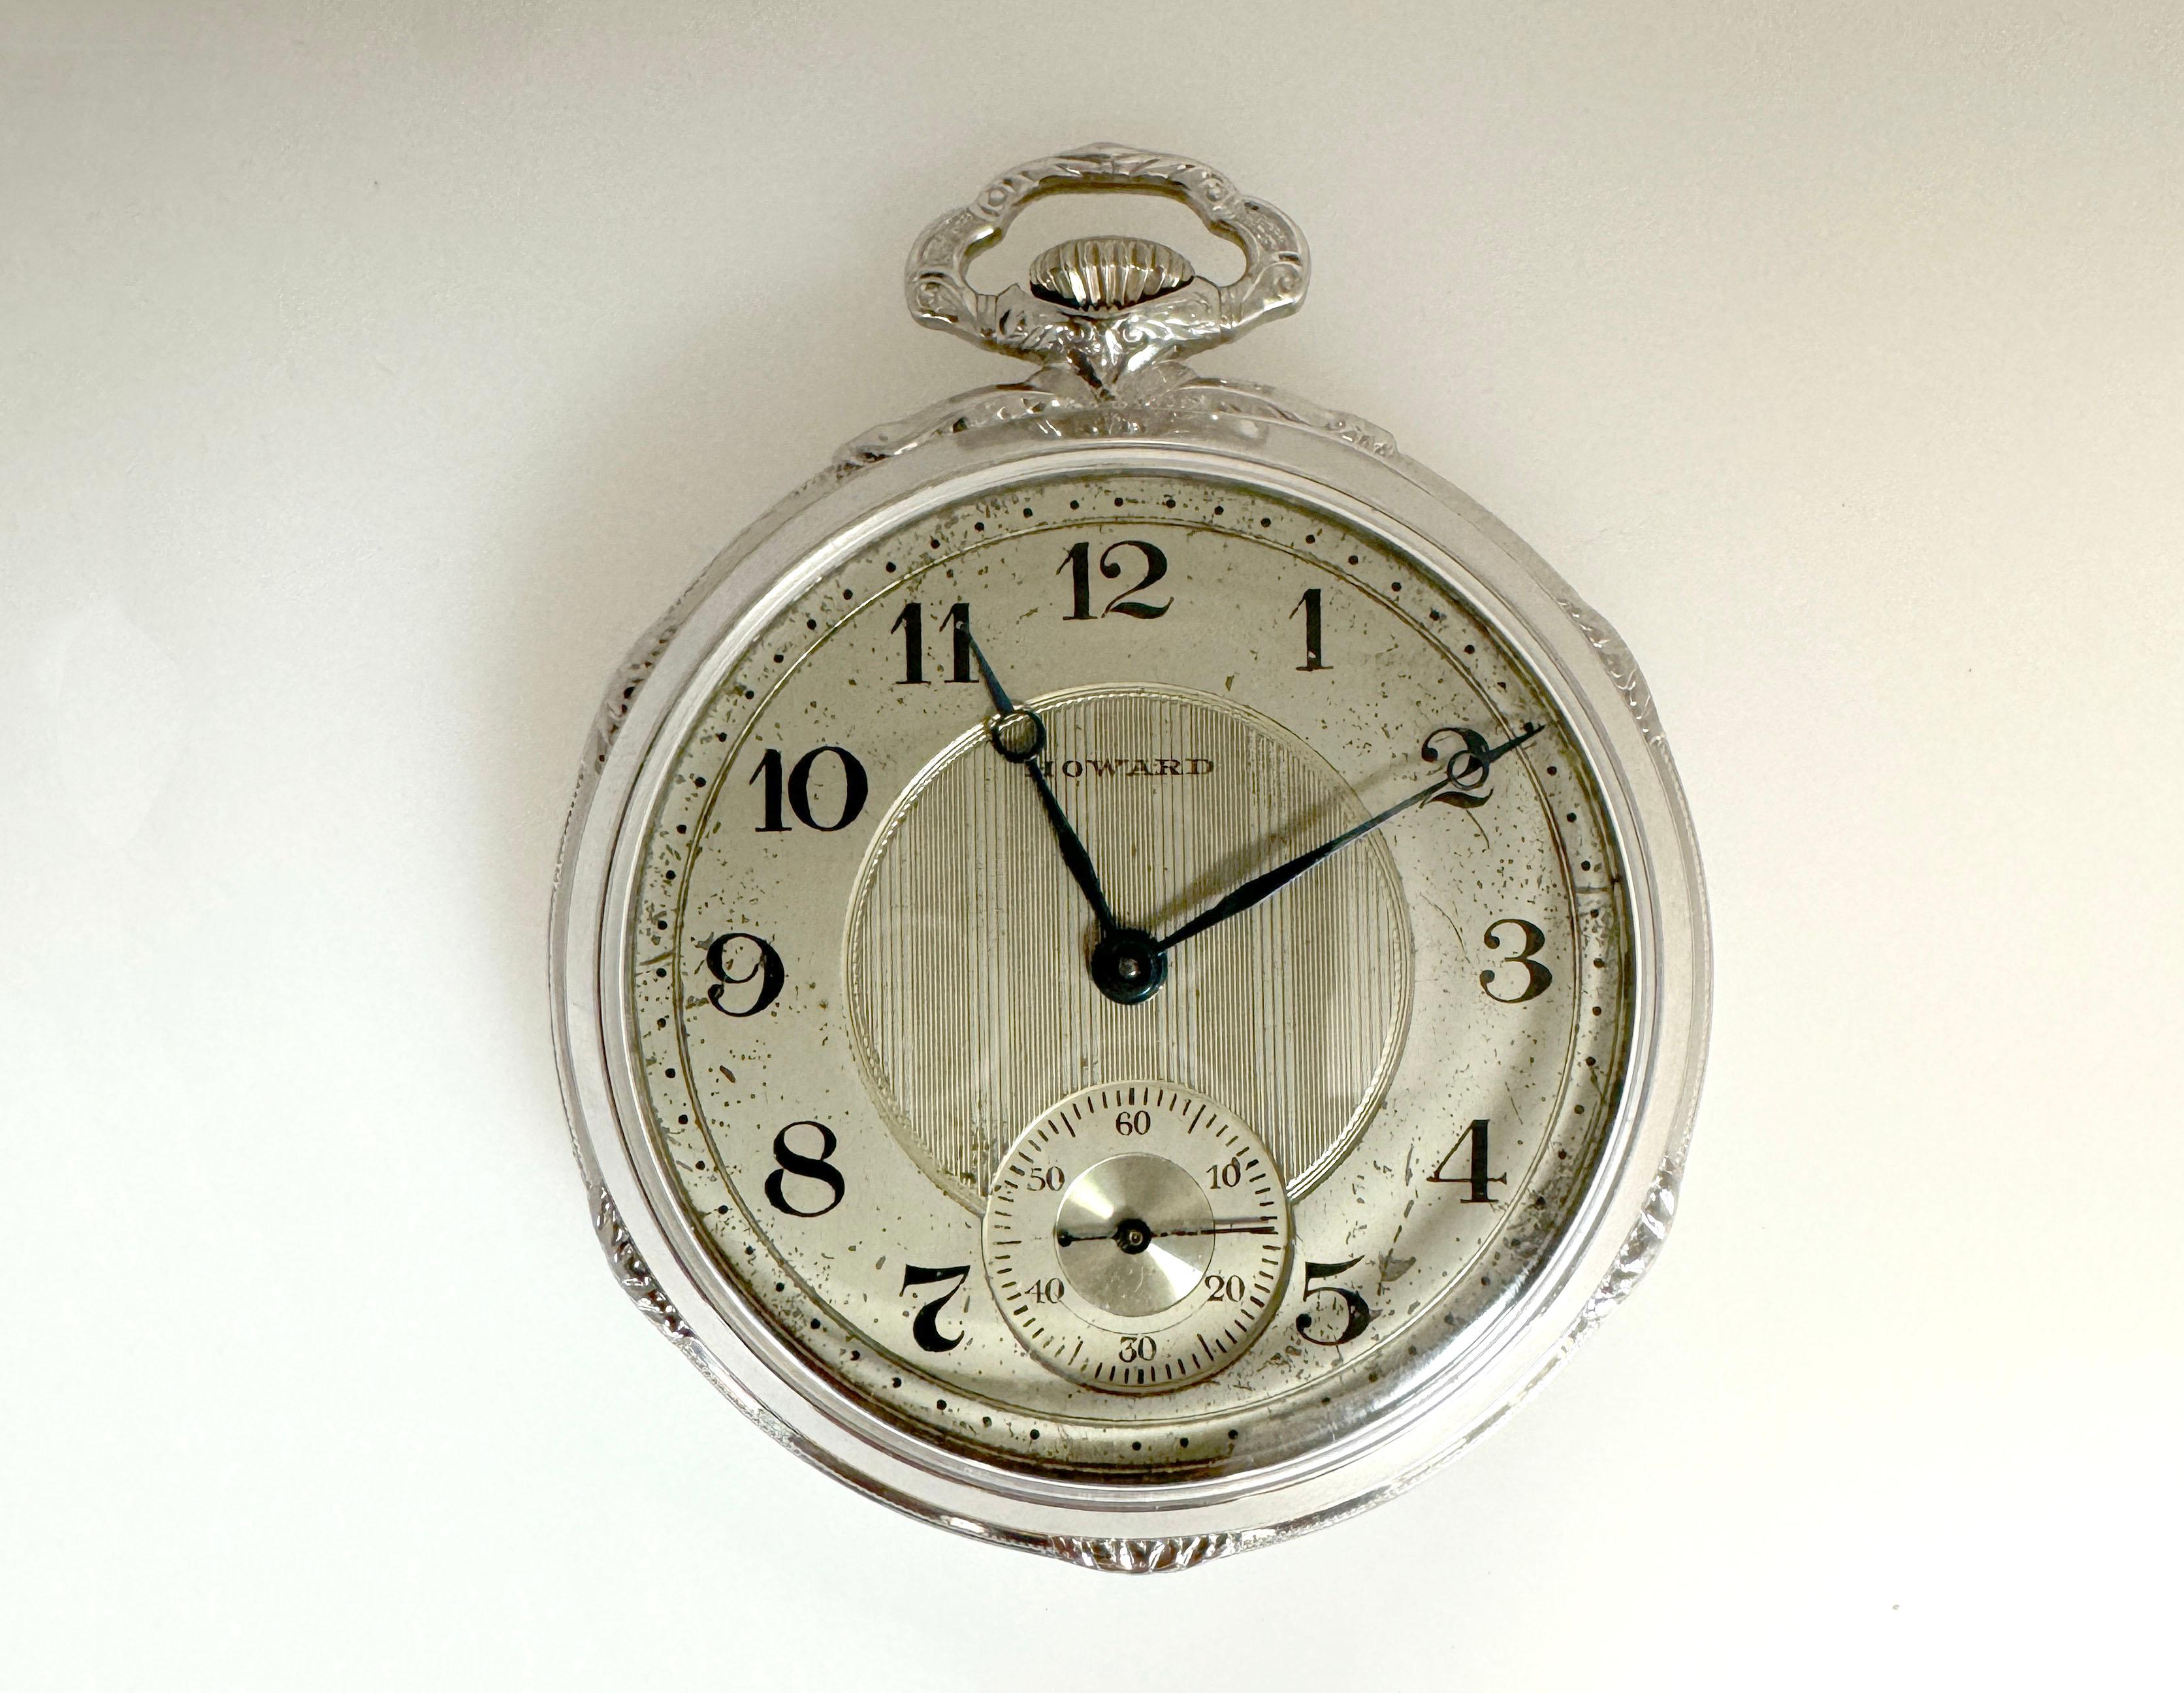 E. Howard Watch Co. Vintage Open Face Pocket Watch 14WG Original 1920's


*Out of Our Private Collection 
*Over $600 in Gold Value, Please Don't make me Scrap it 
*Hand Engraved Case with Hairline Texture on Back
*Bow is Engraved 
*14K white